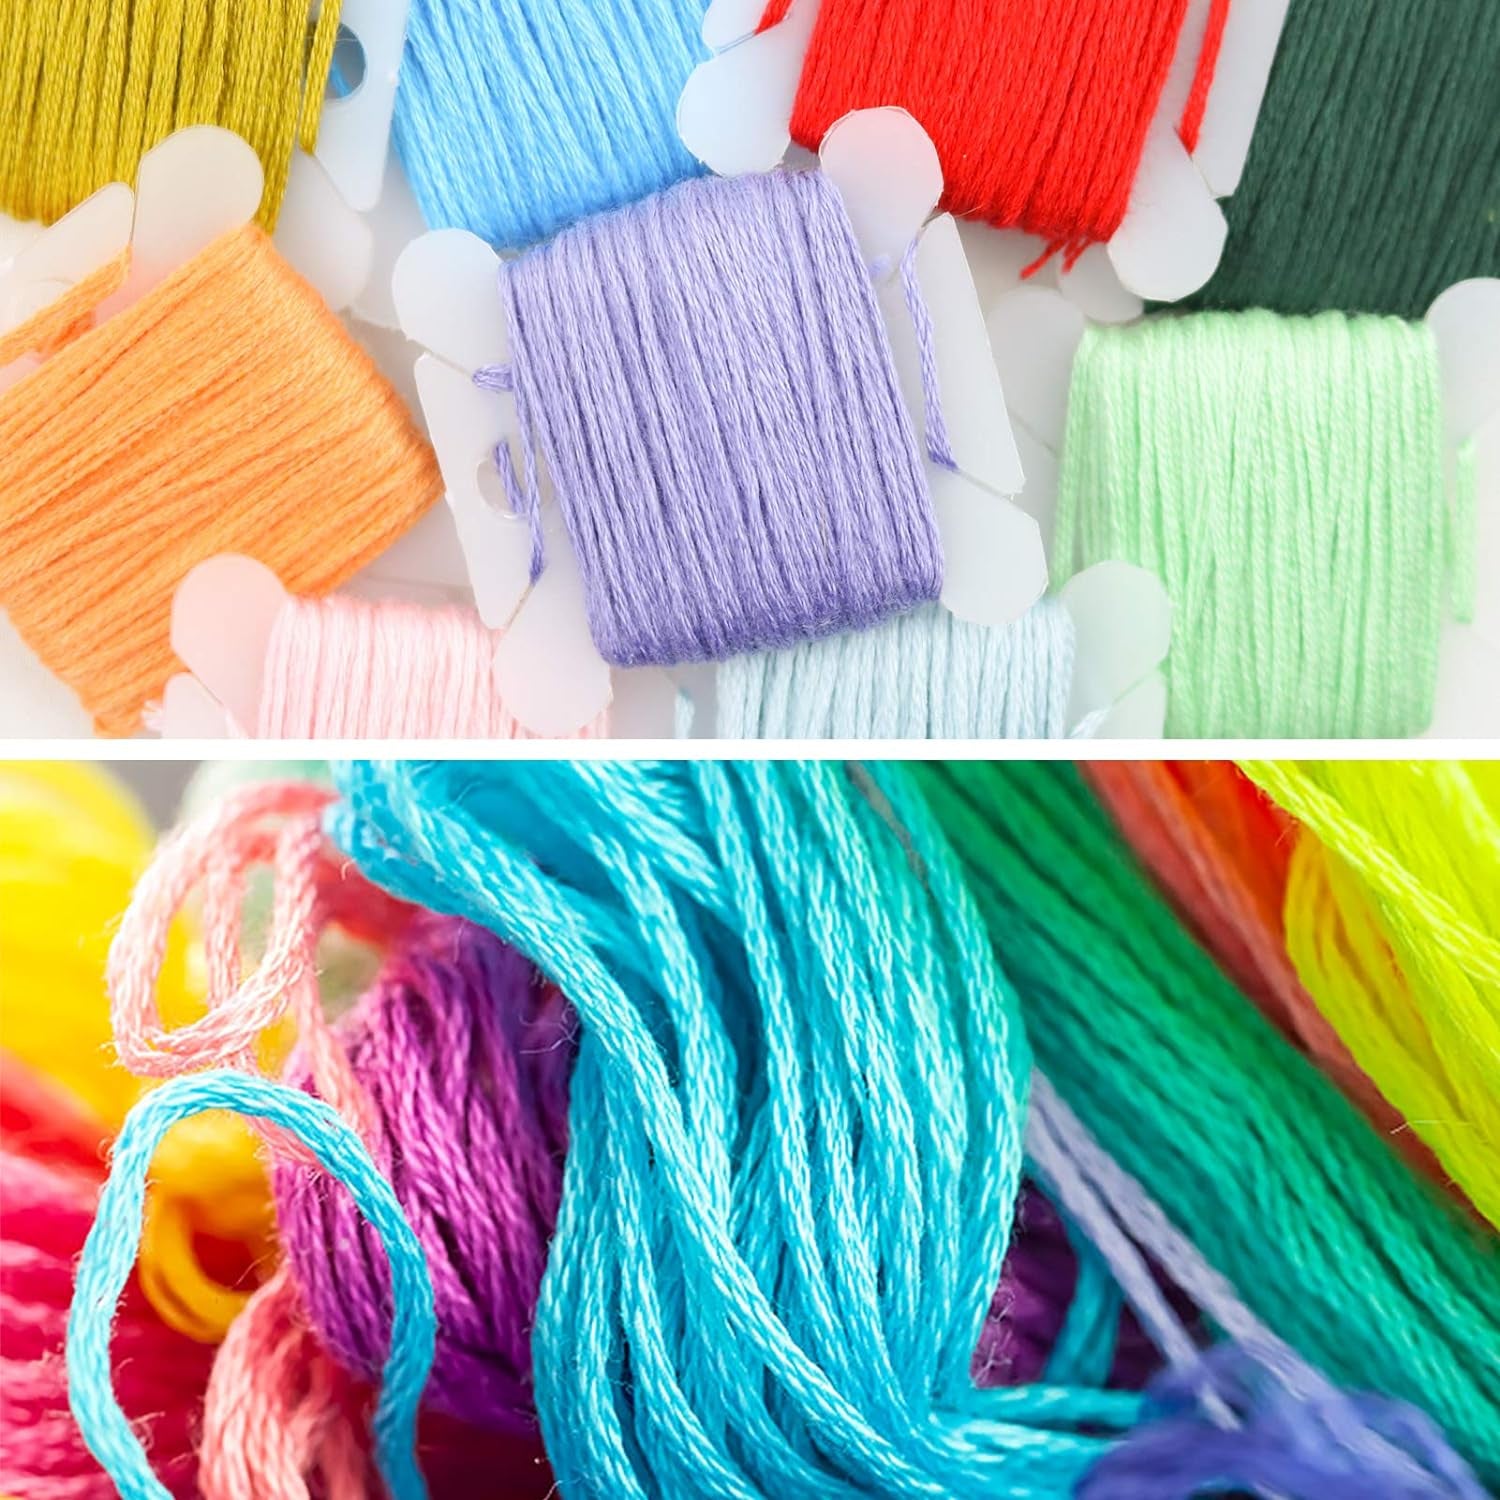 Embroidery Floss 50 Skeins Cross Stitch Thread Rainbow Color Friendship Bracelets Floss Crafts Floss with 12 Pcs Floss Bobbins and 1 Pcs Needle-Threading Tool